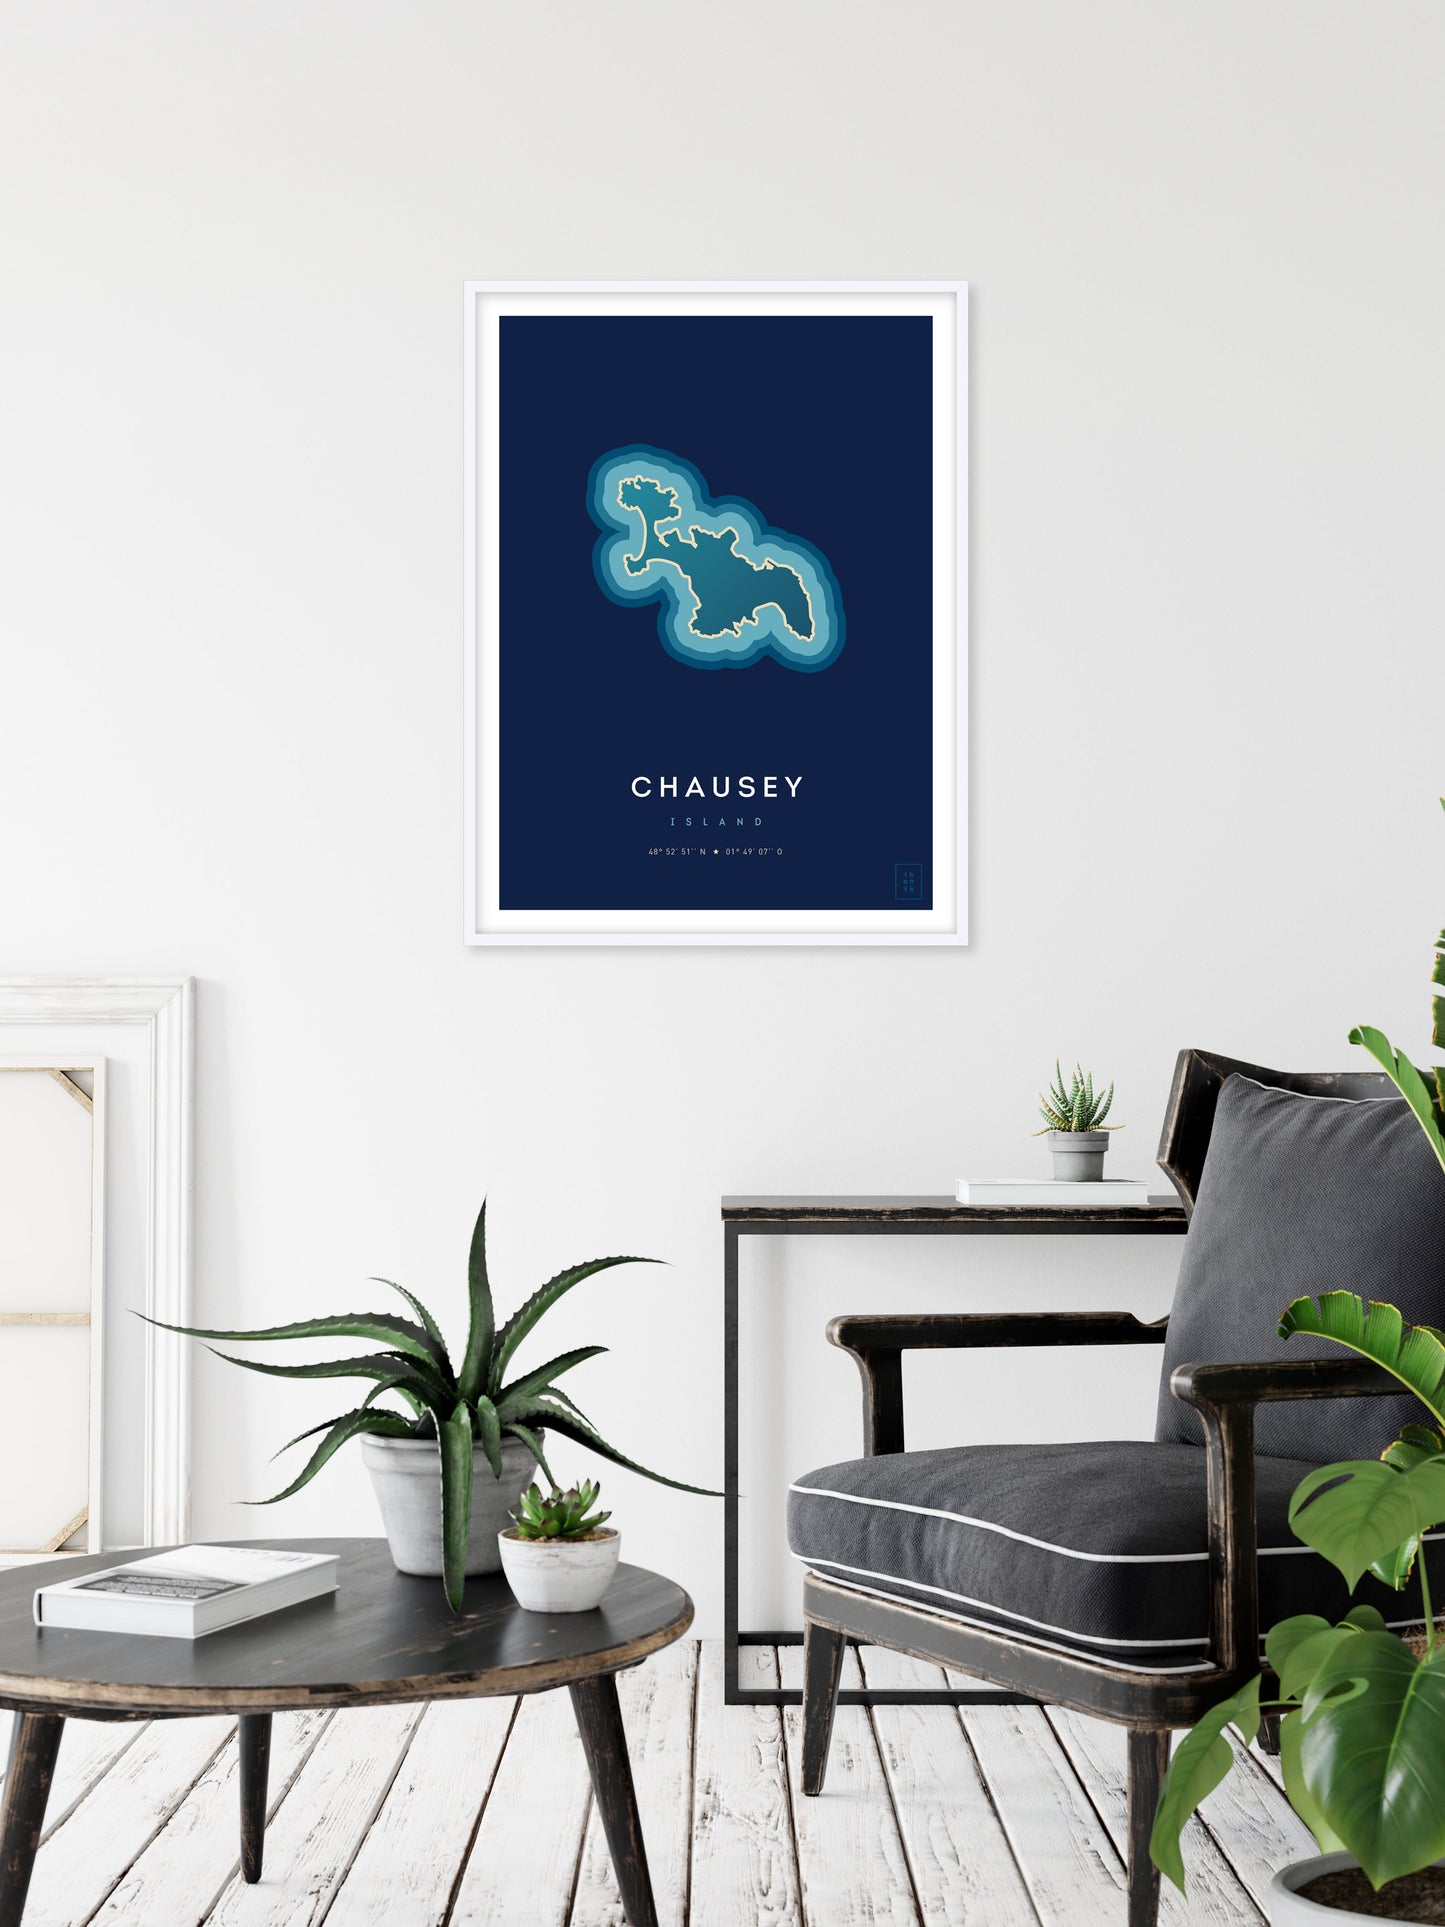 Chausey island poster